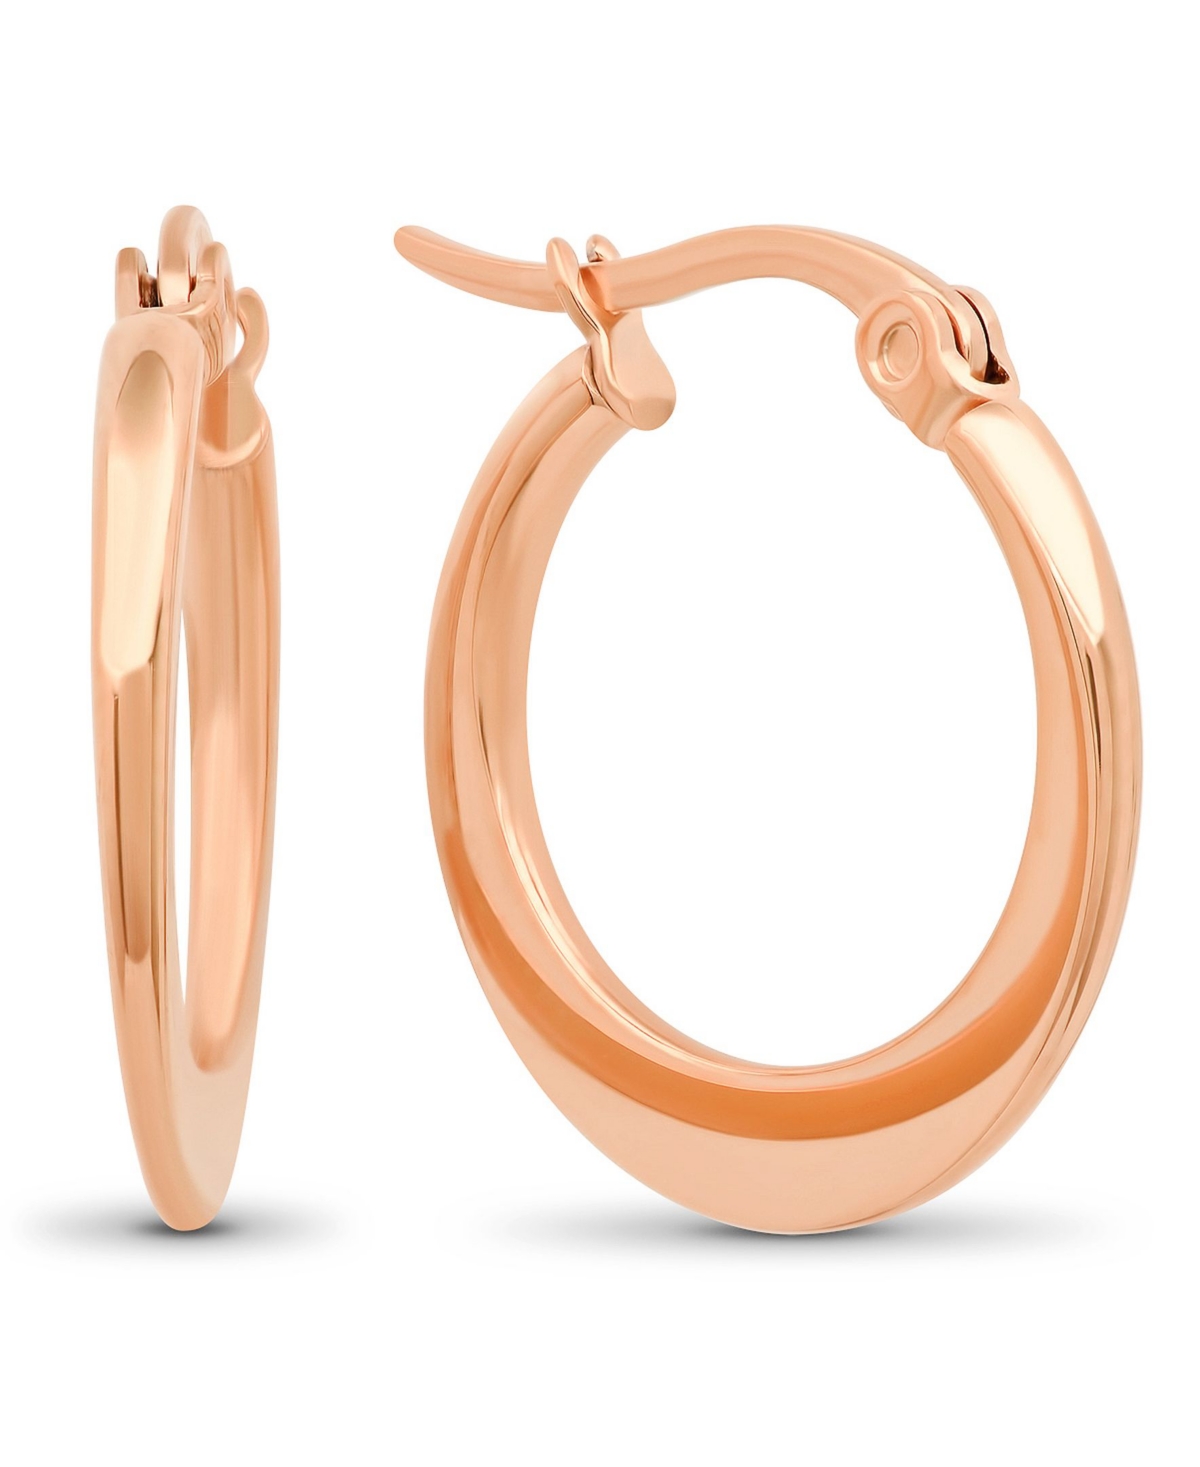 18K Rose Gold Plated Stainless Steel Flat Hoop Earrings - Rose Gold-Plated